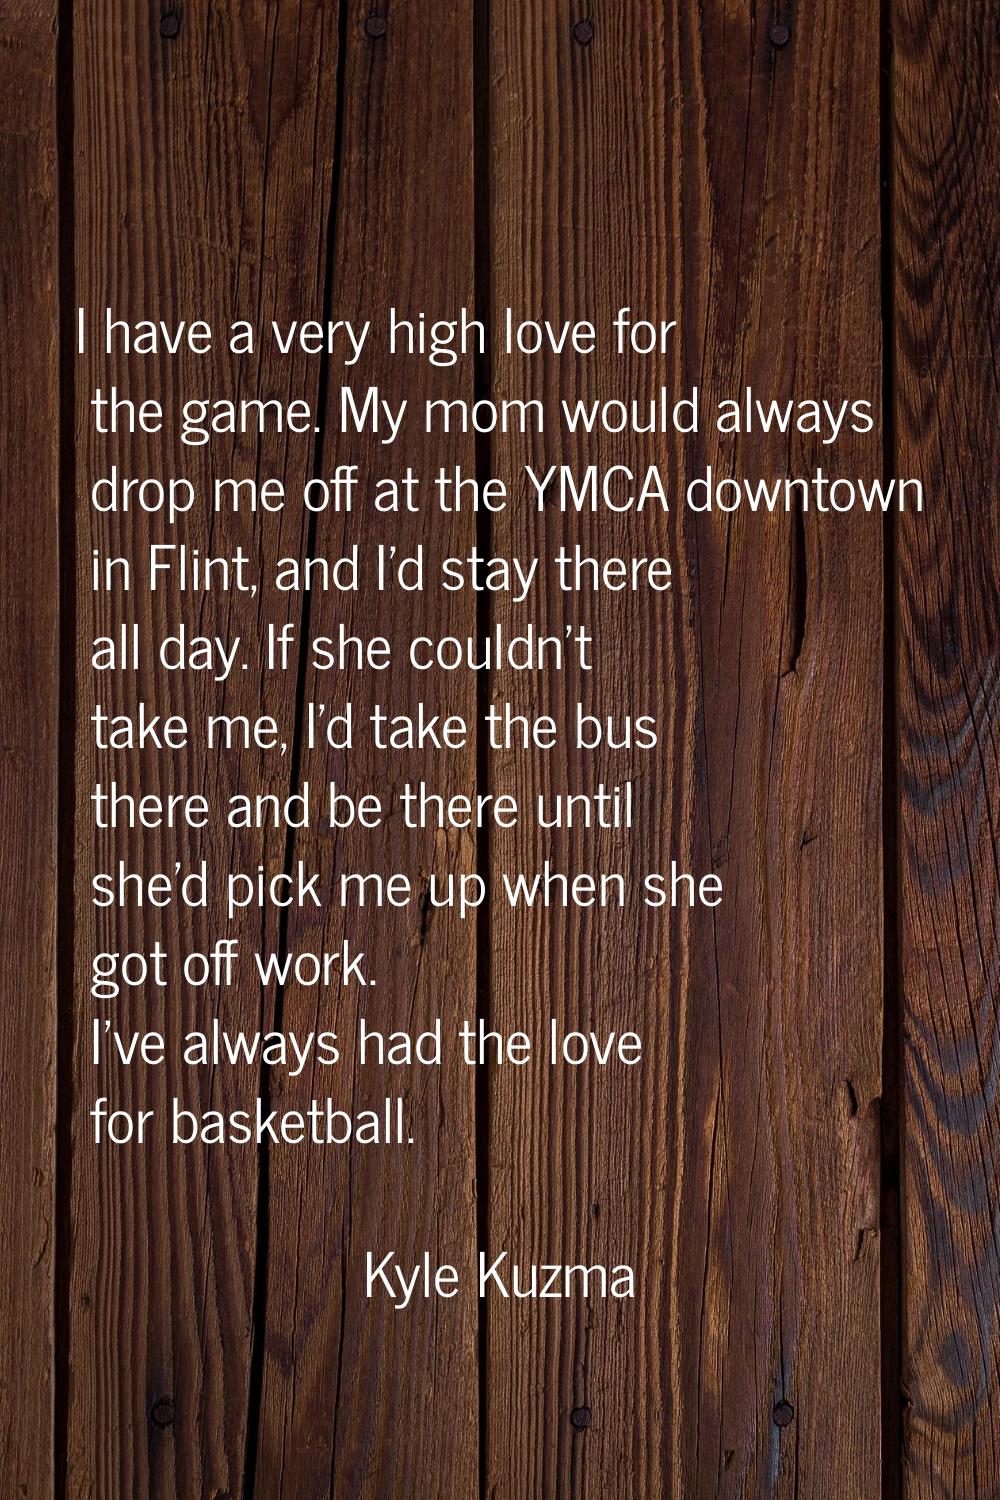 I have a very high love for the game. My mom would always drop me off at the YMCA downtown in Flint